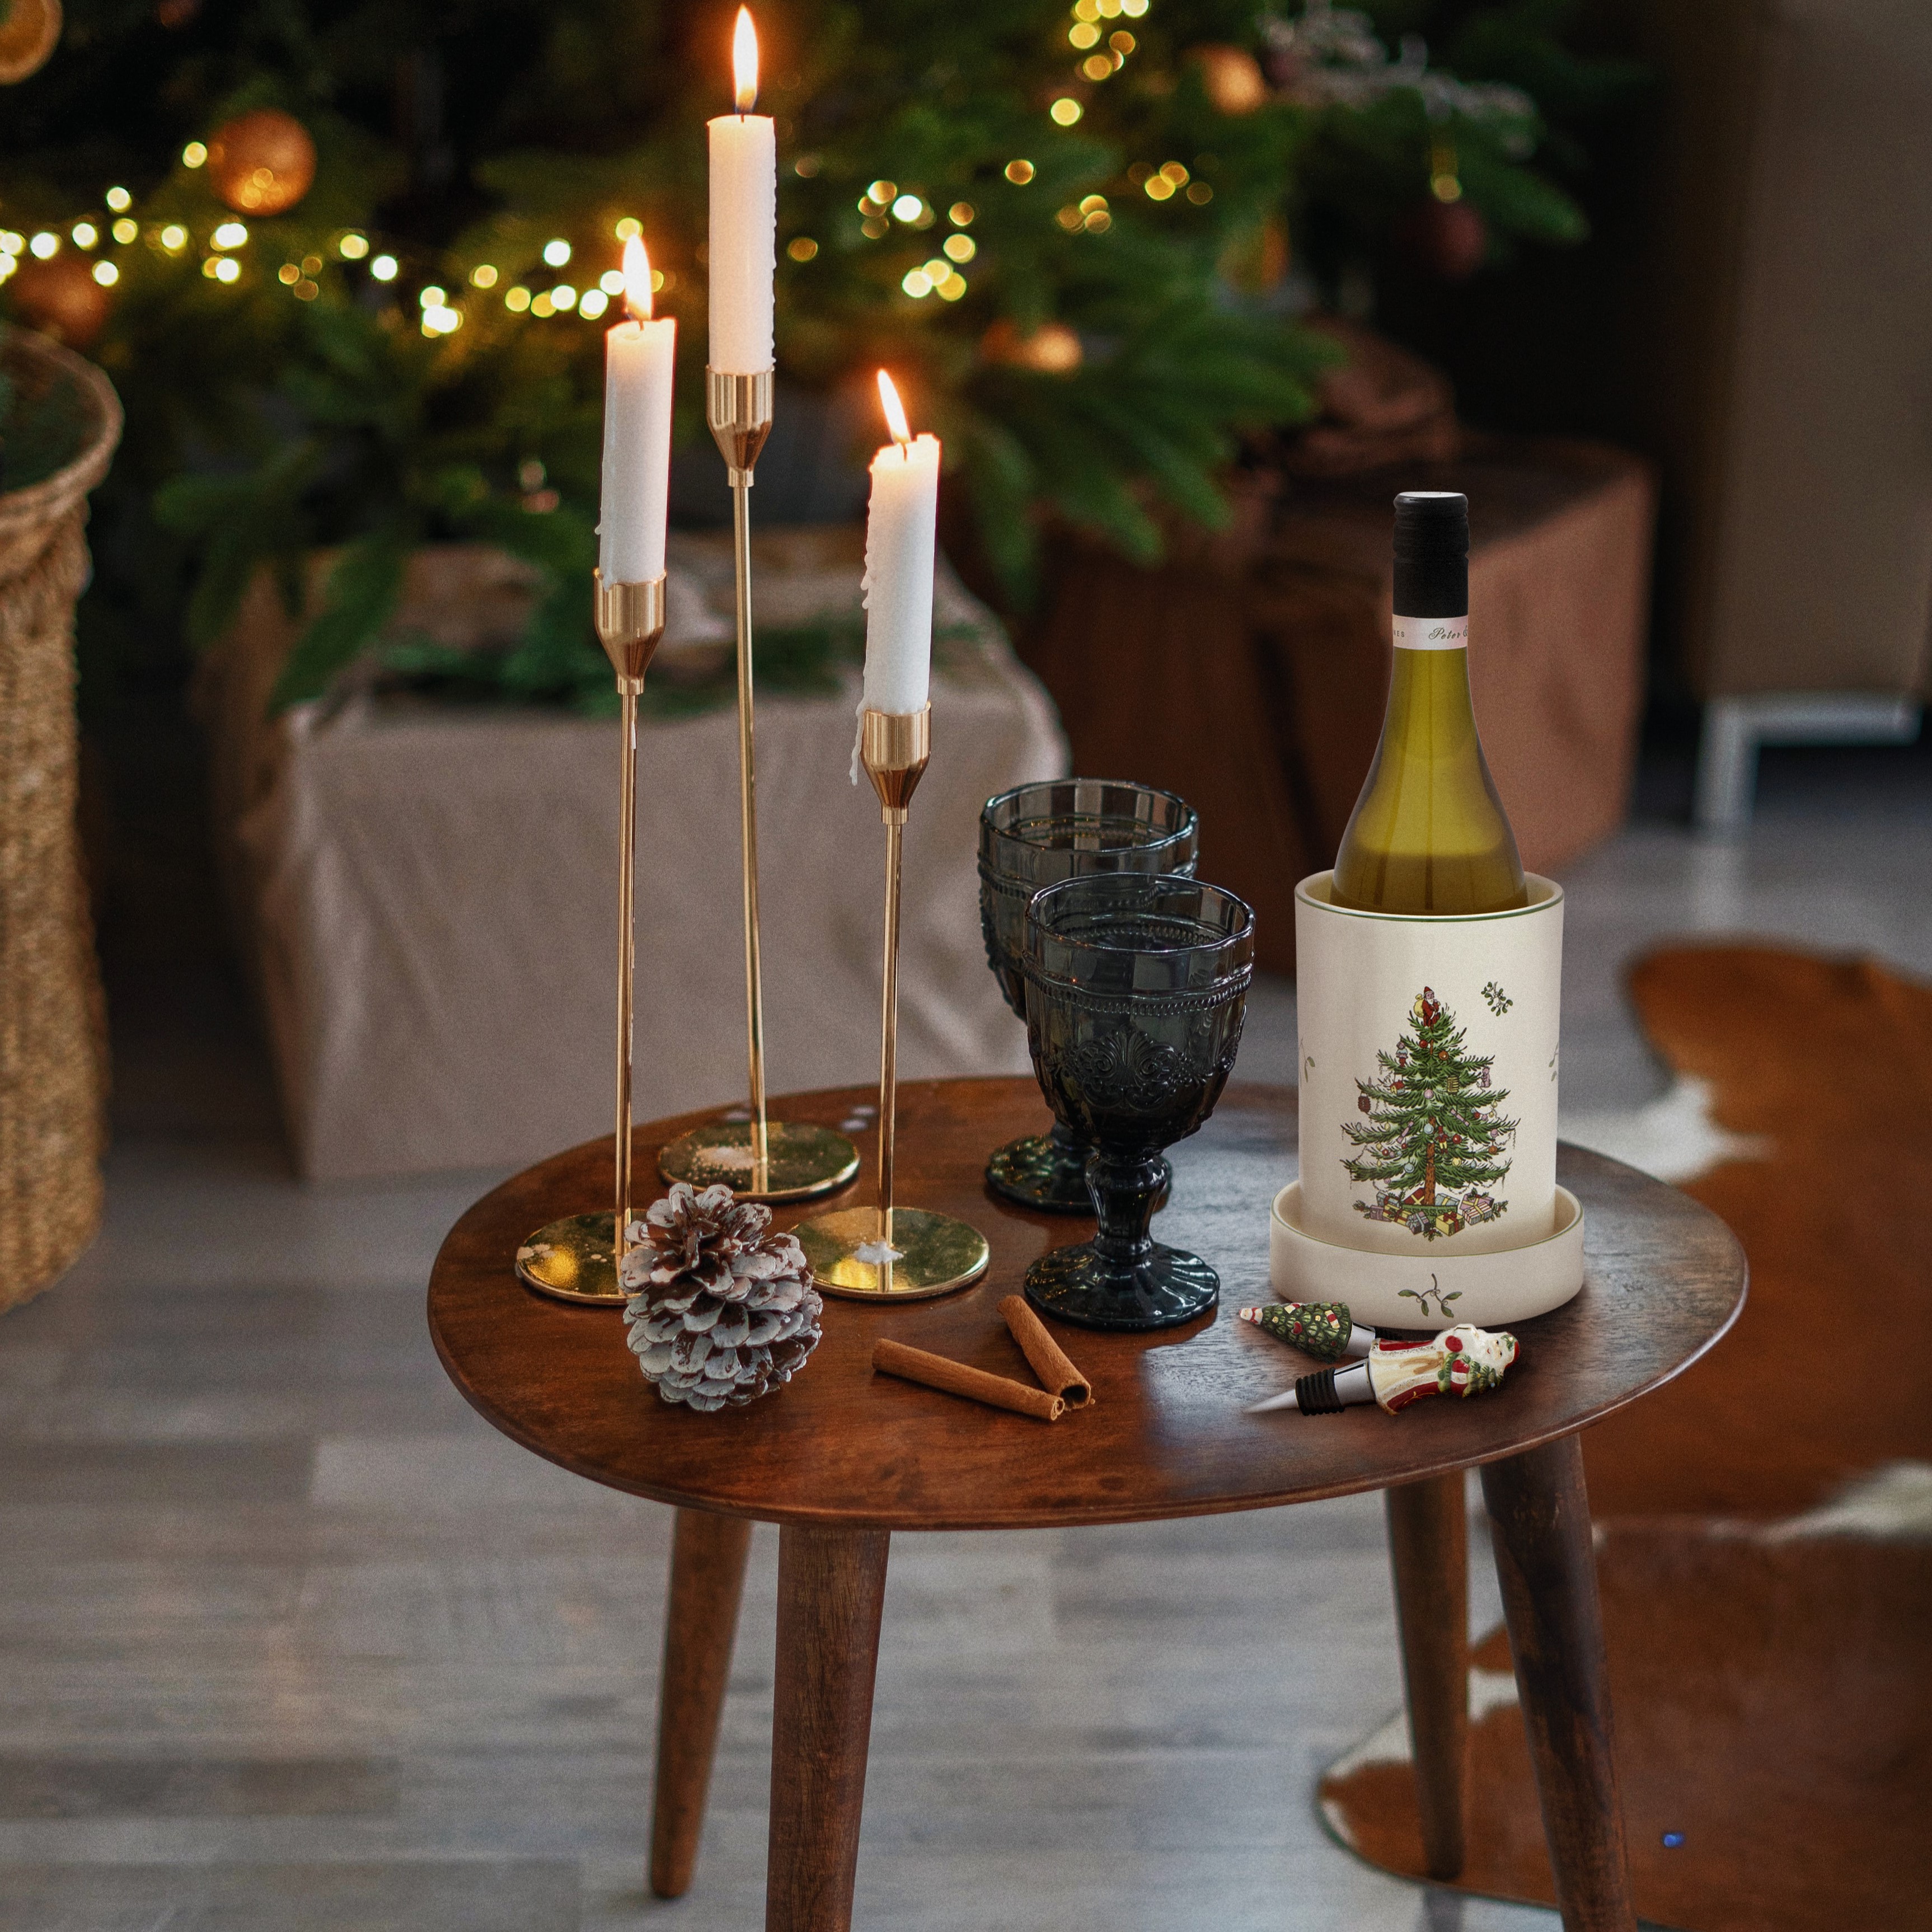 Christmas Tree 4 Piece Wine Gift Set image number null